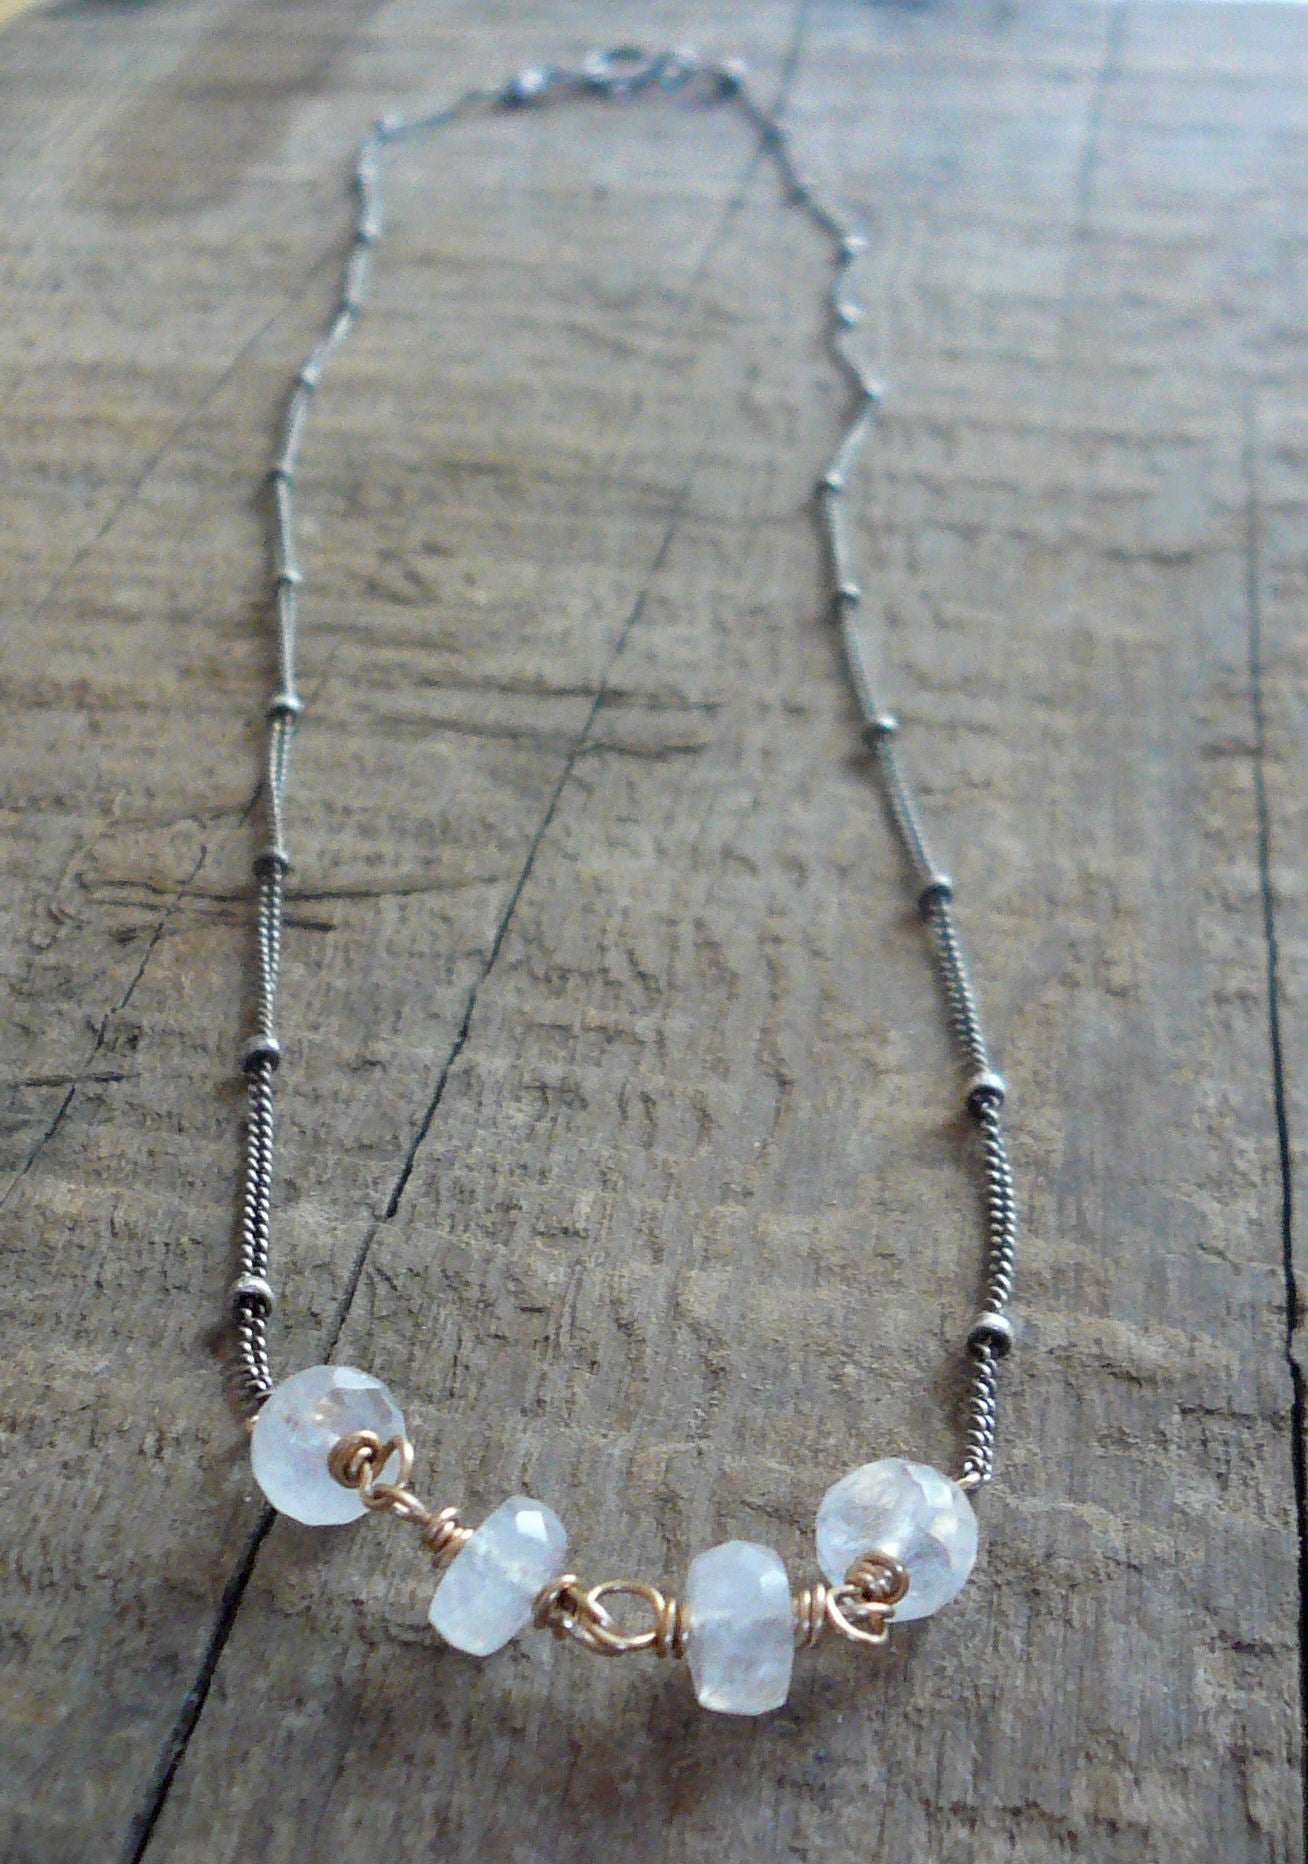 Miscible Collection Necklace - Handmade. Moonstone. Oxidized Sterling ...